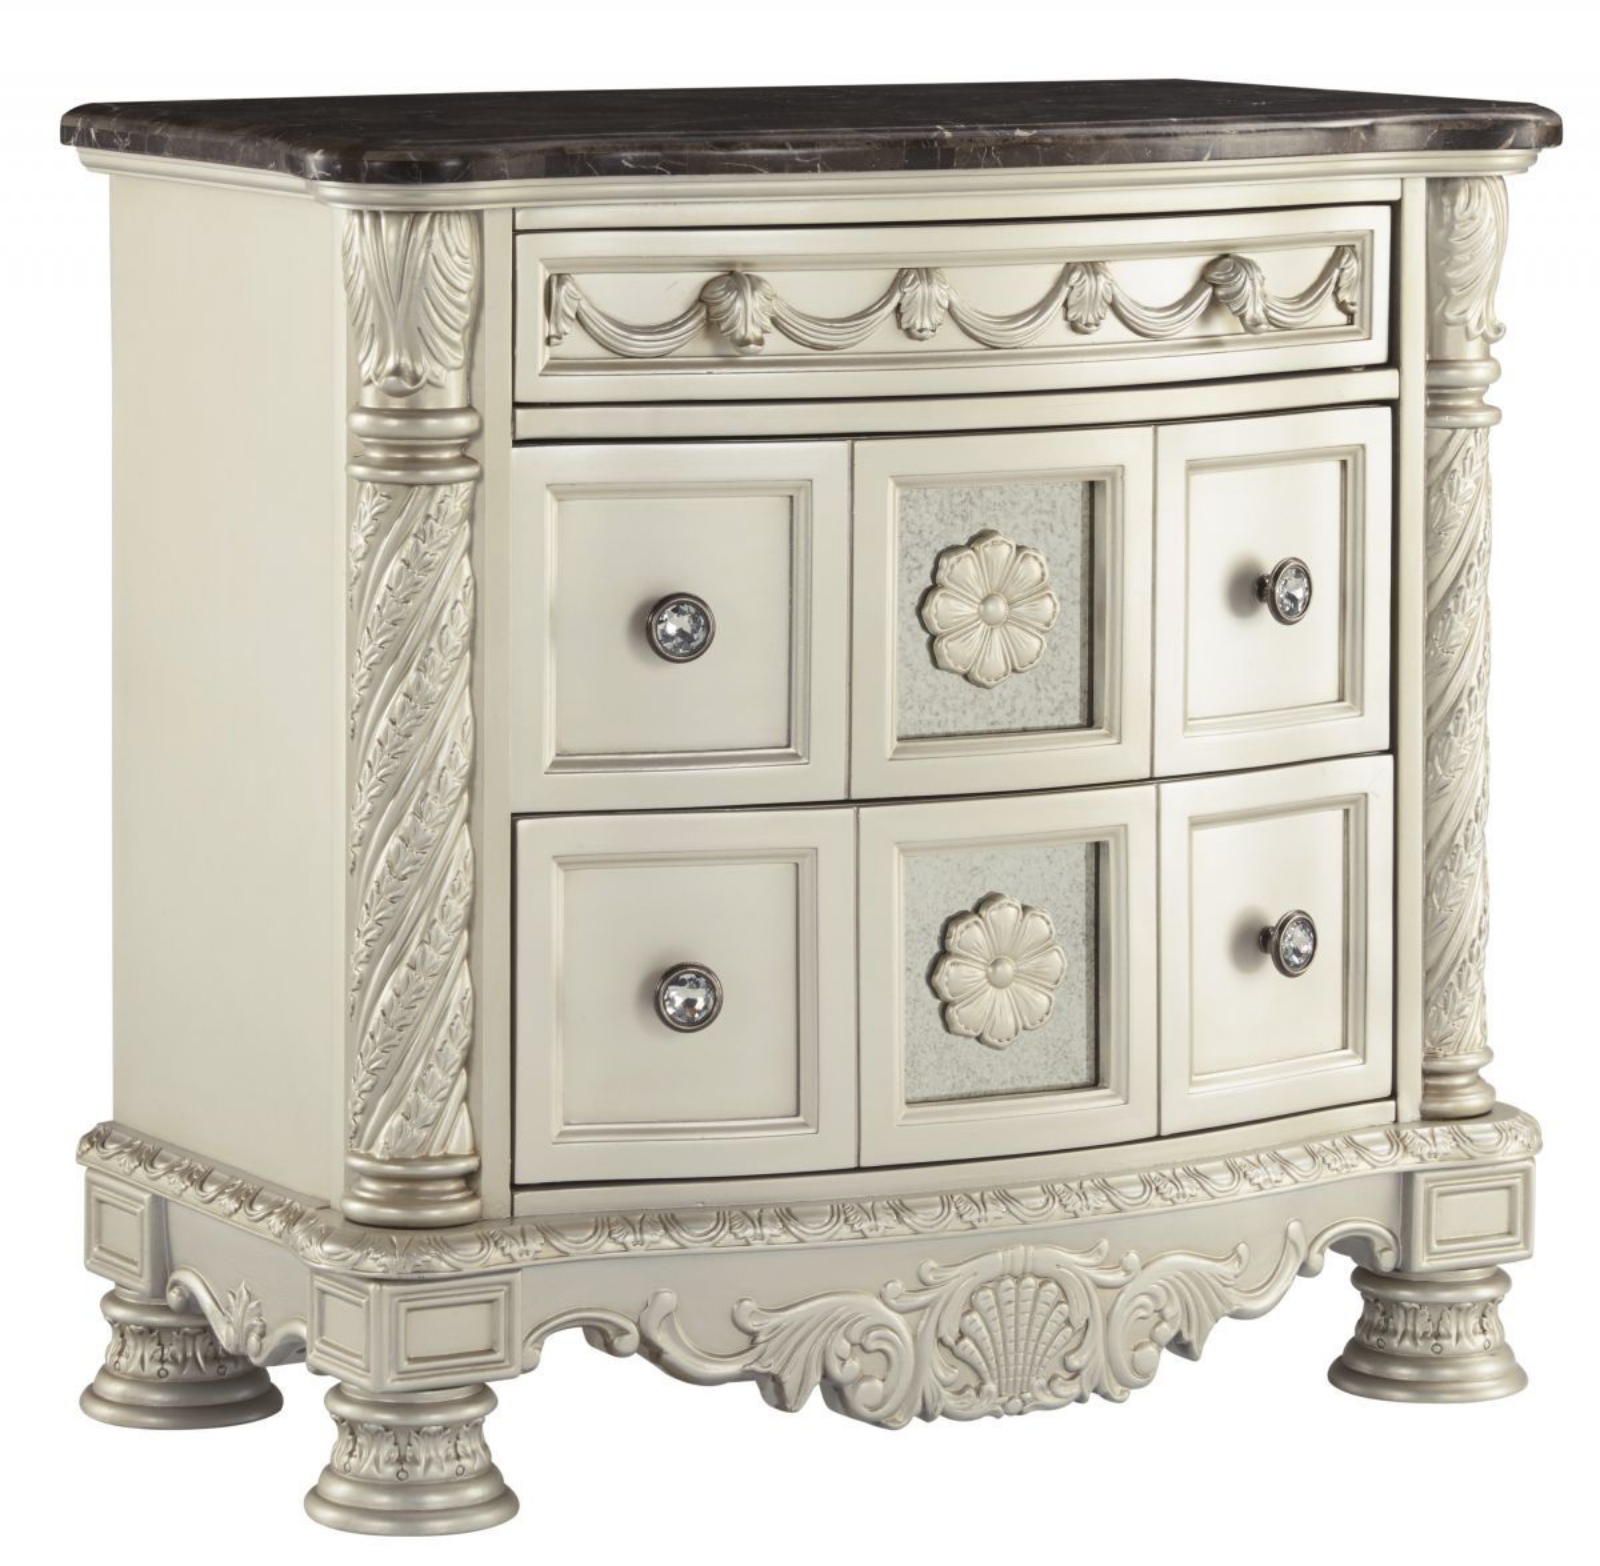 Picture of Cassimore Nightstand